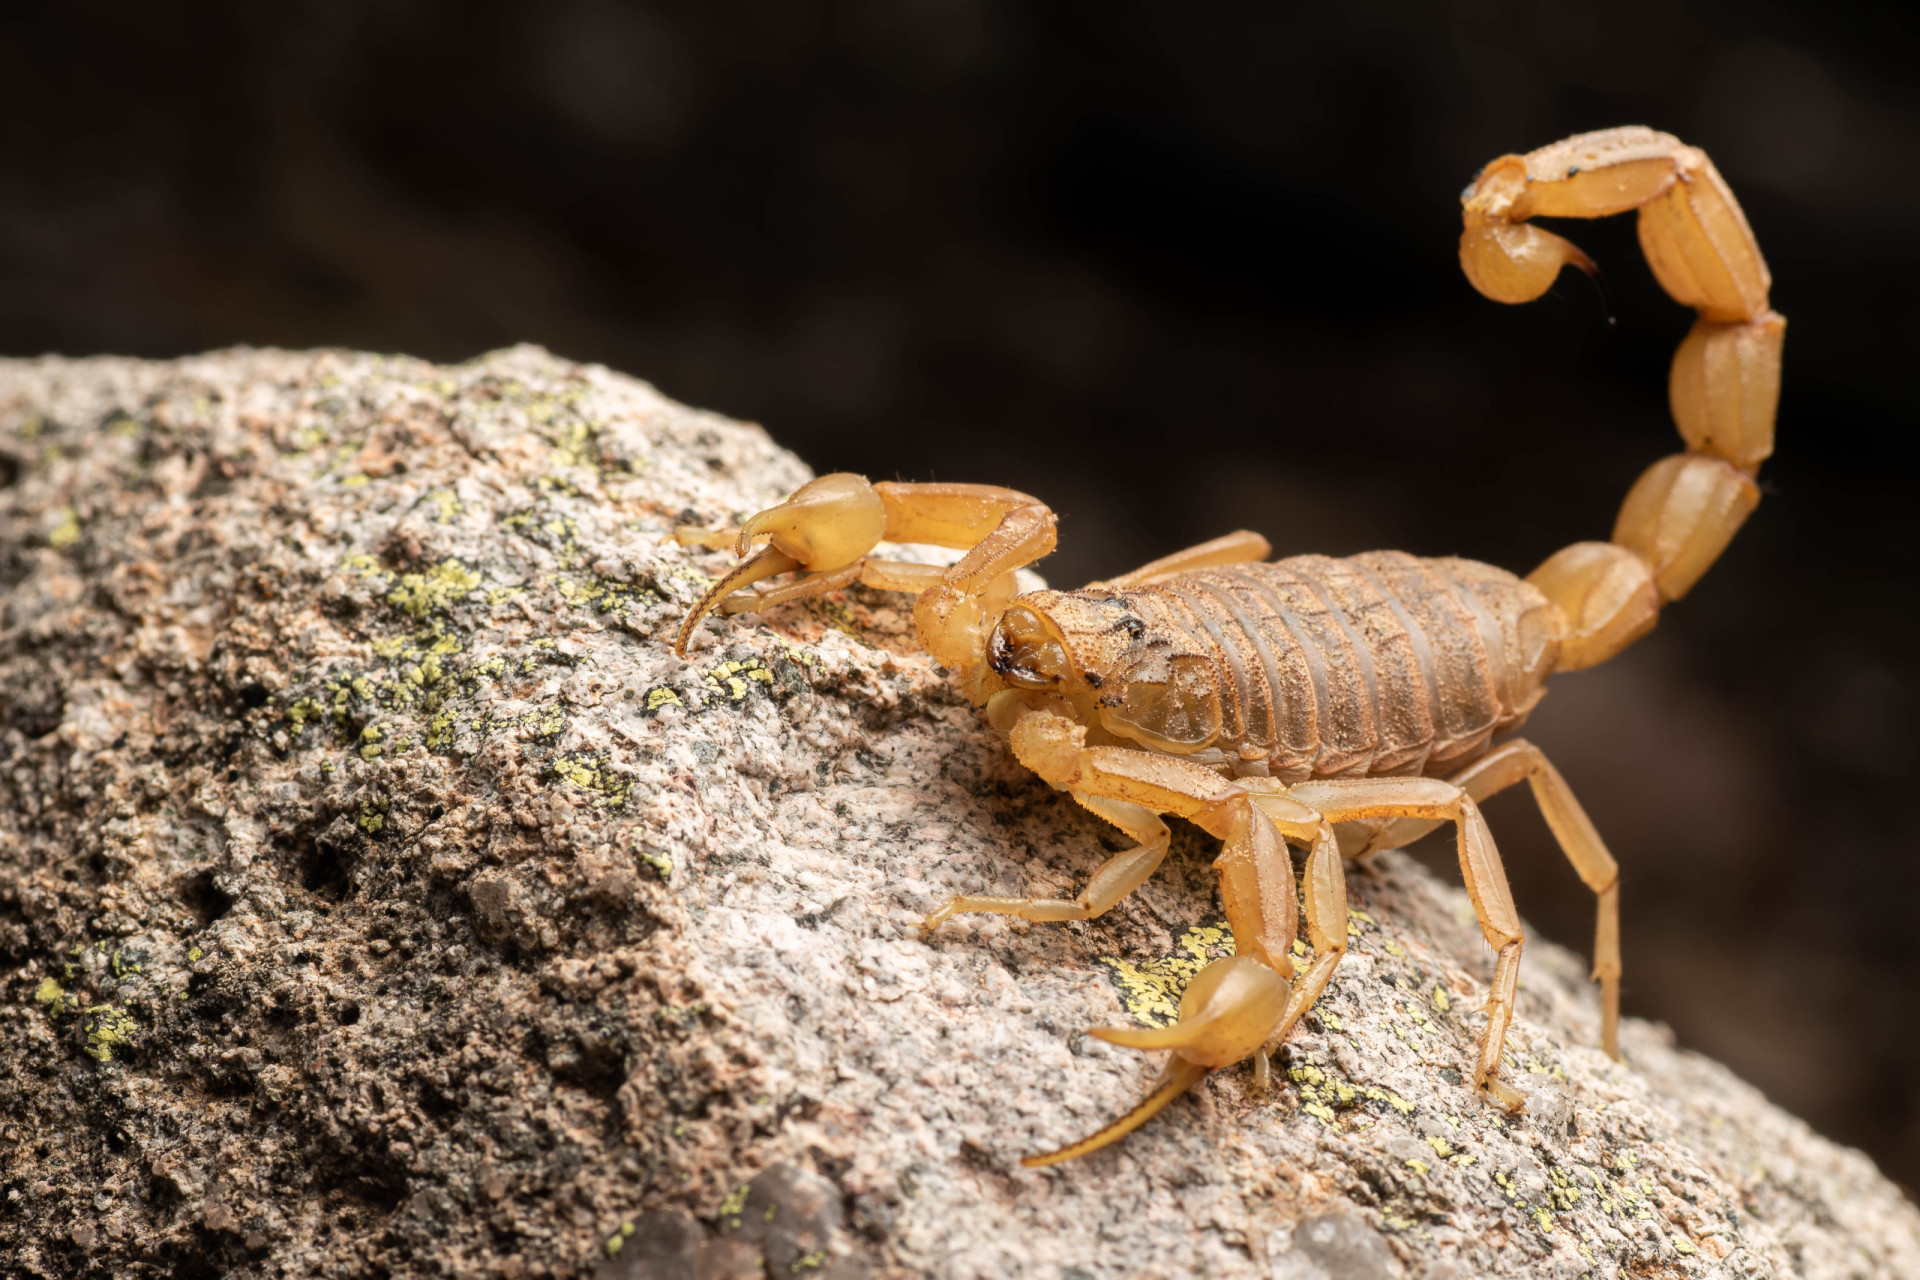 <p>You'll need to step carefully when following a hiking trail through the Tabernas Desert. The common yellow scorpion has a habit of hiding under stones, but for the most part will remain hidden unless disturbed. Its sting is painful, but fortunately with only mild toxic effects.</p><p>You may also like:<a href="https://www.starsinsider.com/n/342622?utm_source=msn.com&utm_medium=display&utm_campaign=referral_description&utm_content=570754en-en"> Man-made marvels: The world's largest artificial islands </a></p>